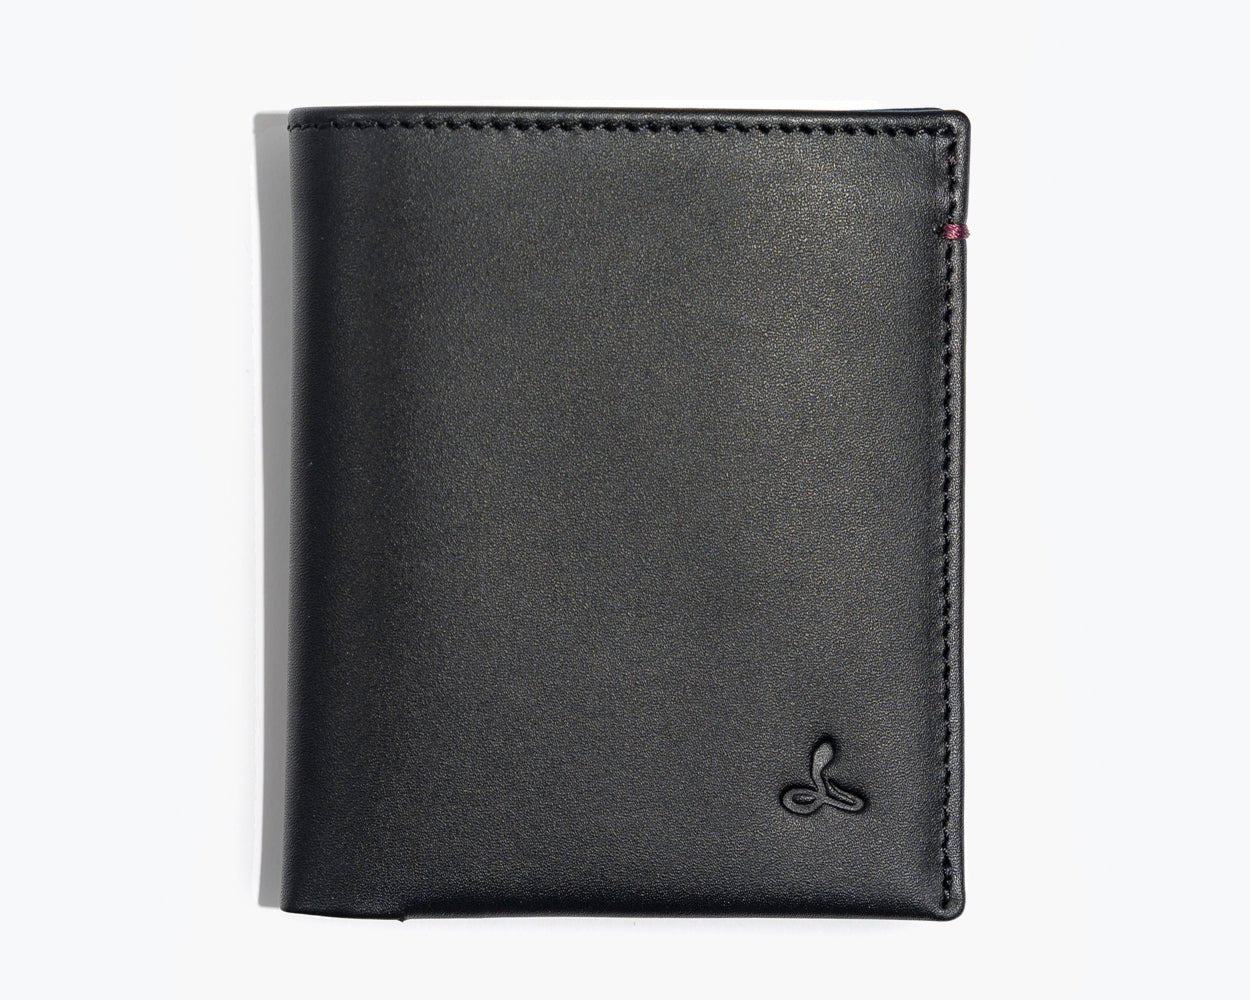 LEATHER BIFOLD WALLET - THE ESSENTIAL COLLECTION Black/Plum - Snakehive UK